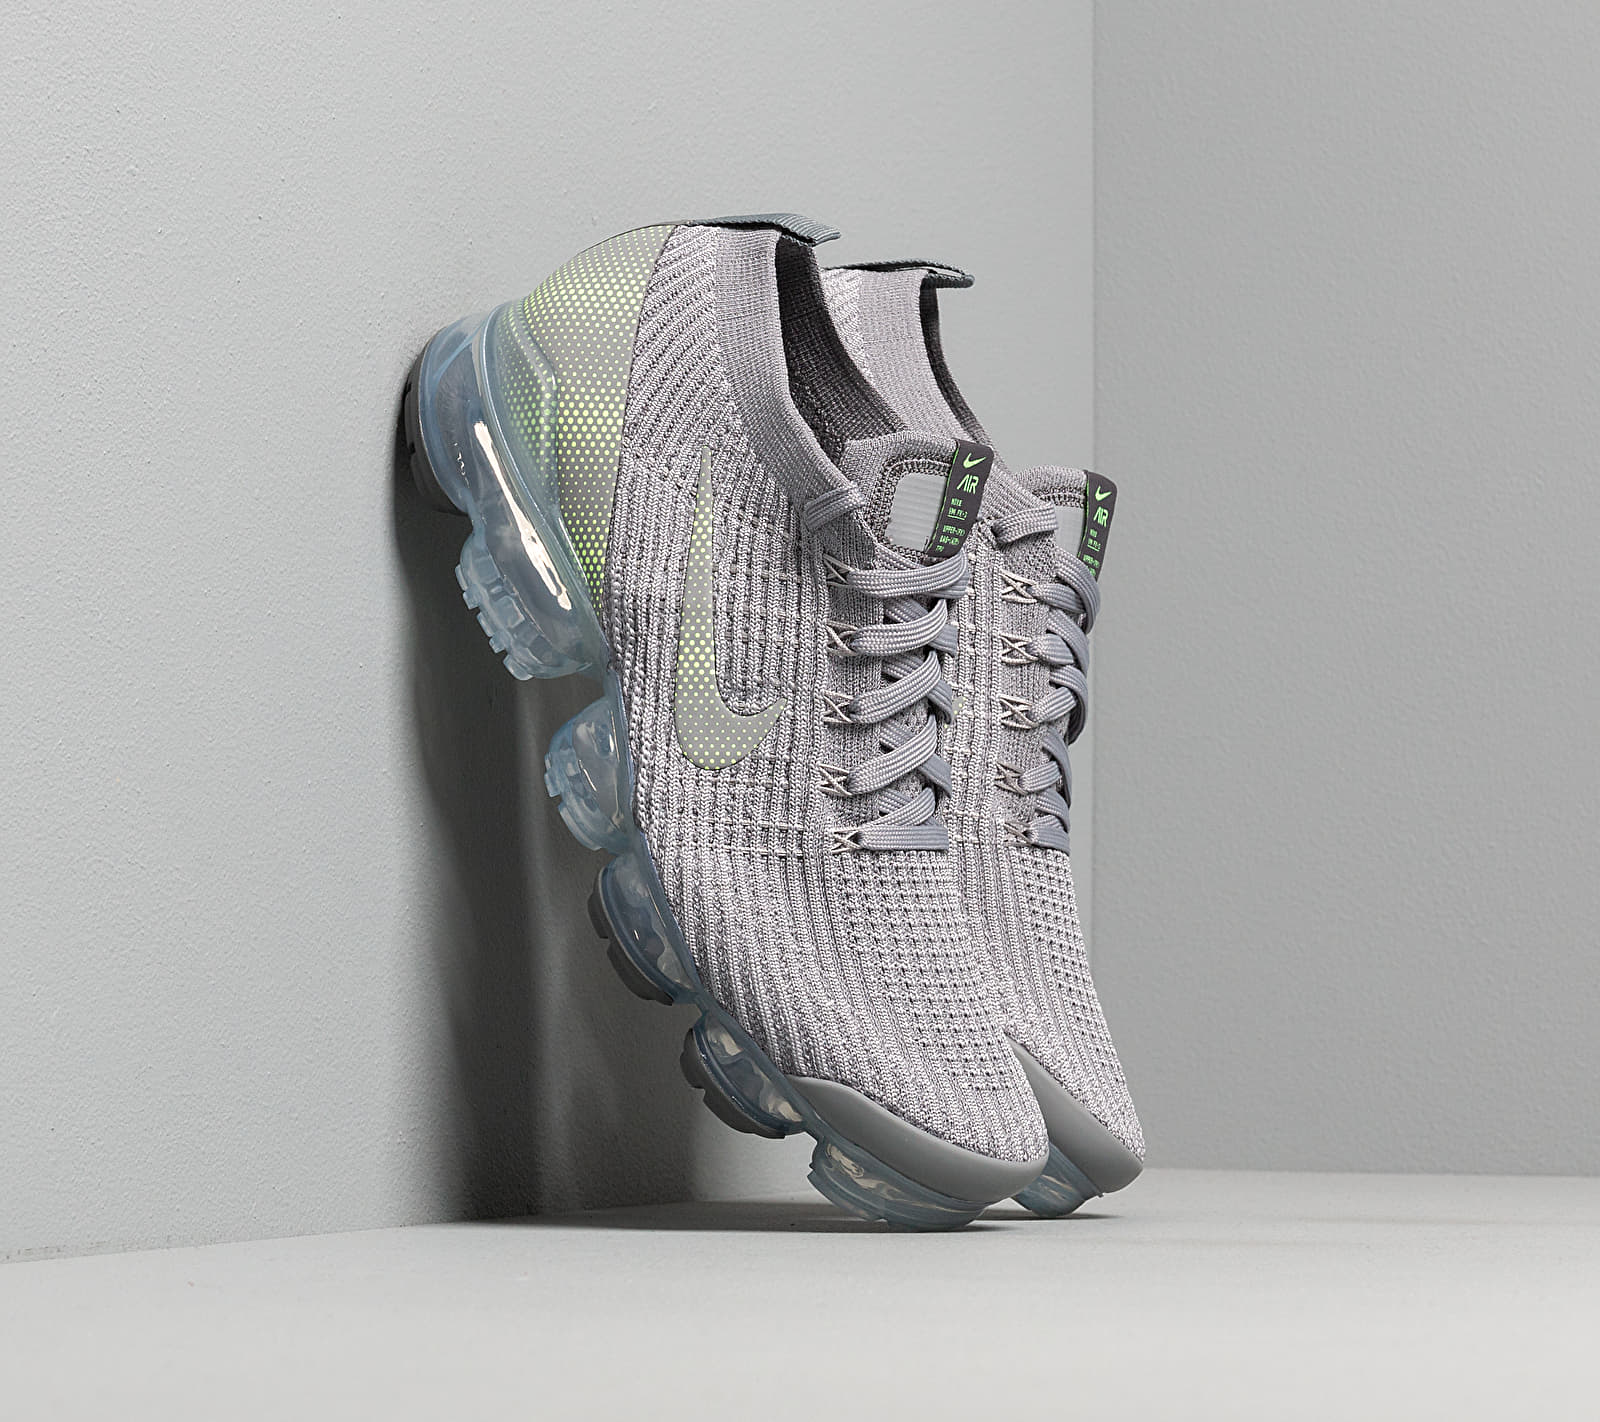 Nike Air Vapormax Flyknit 3 Particle Grey/ Ghost Green-Iron Grey CU1926-002